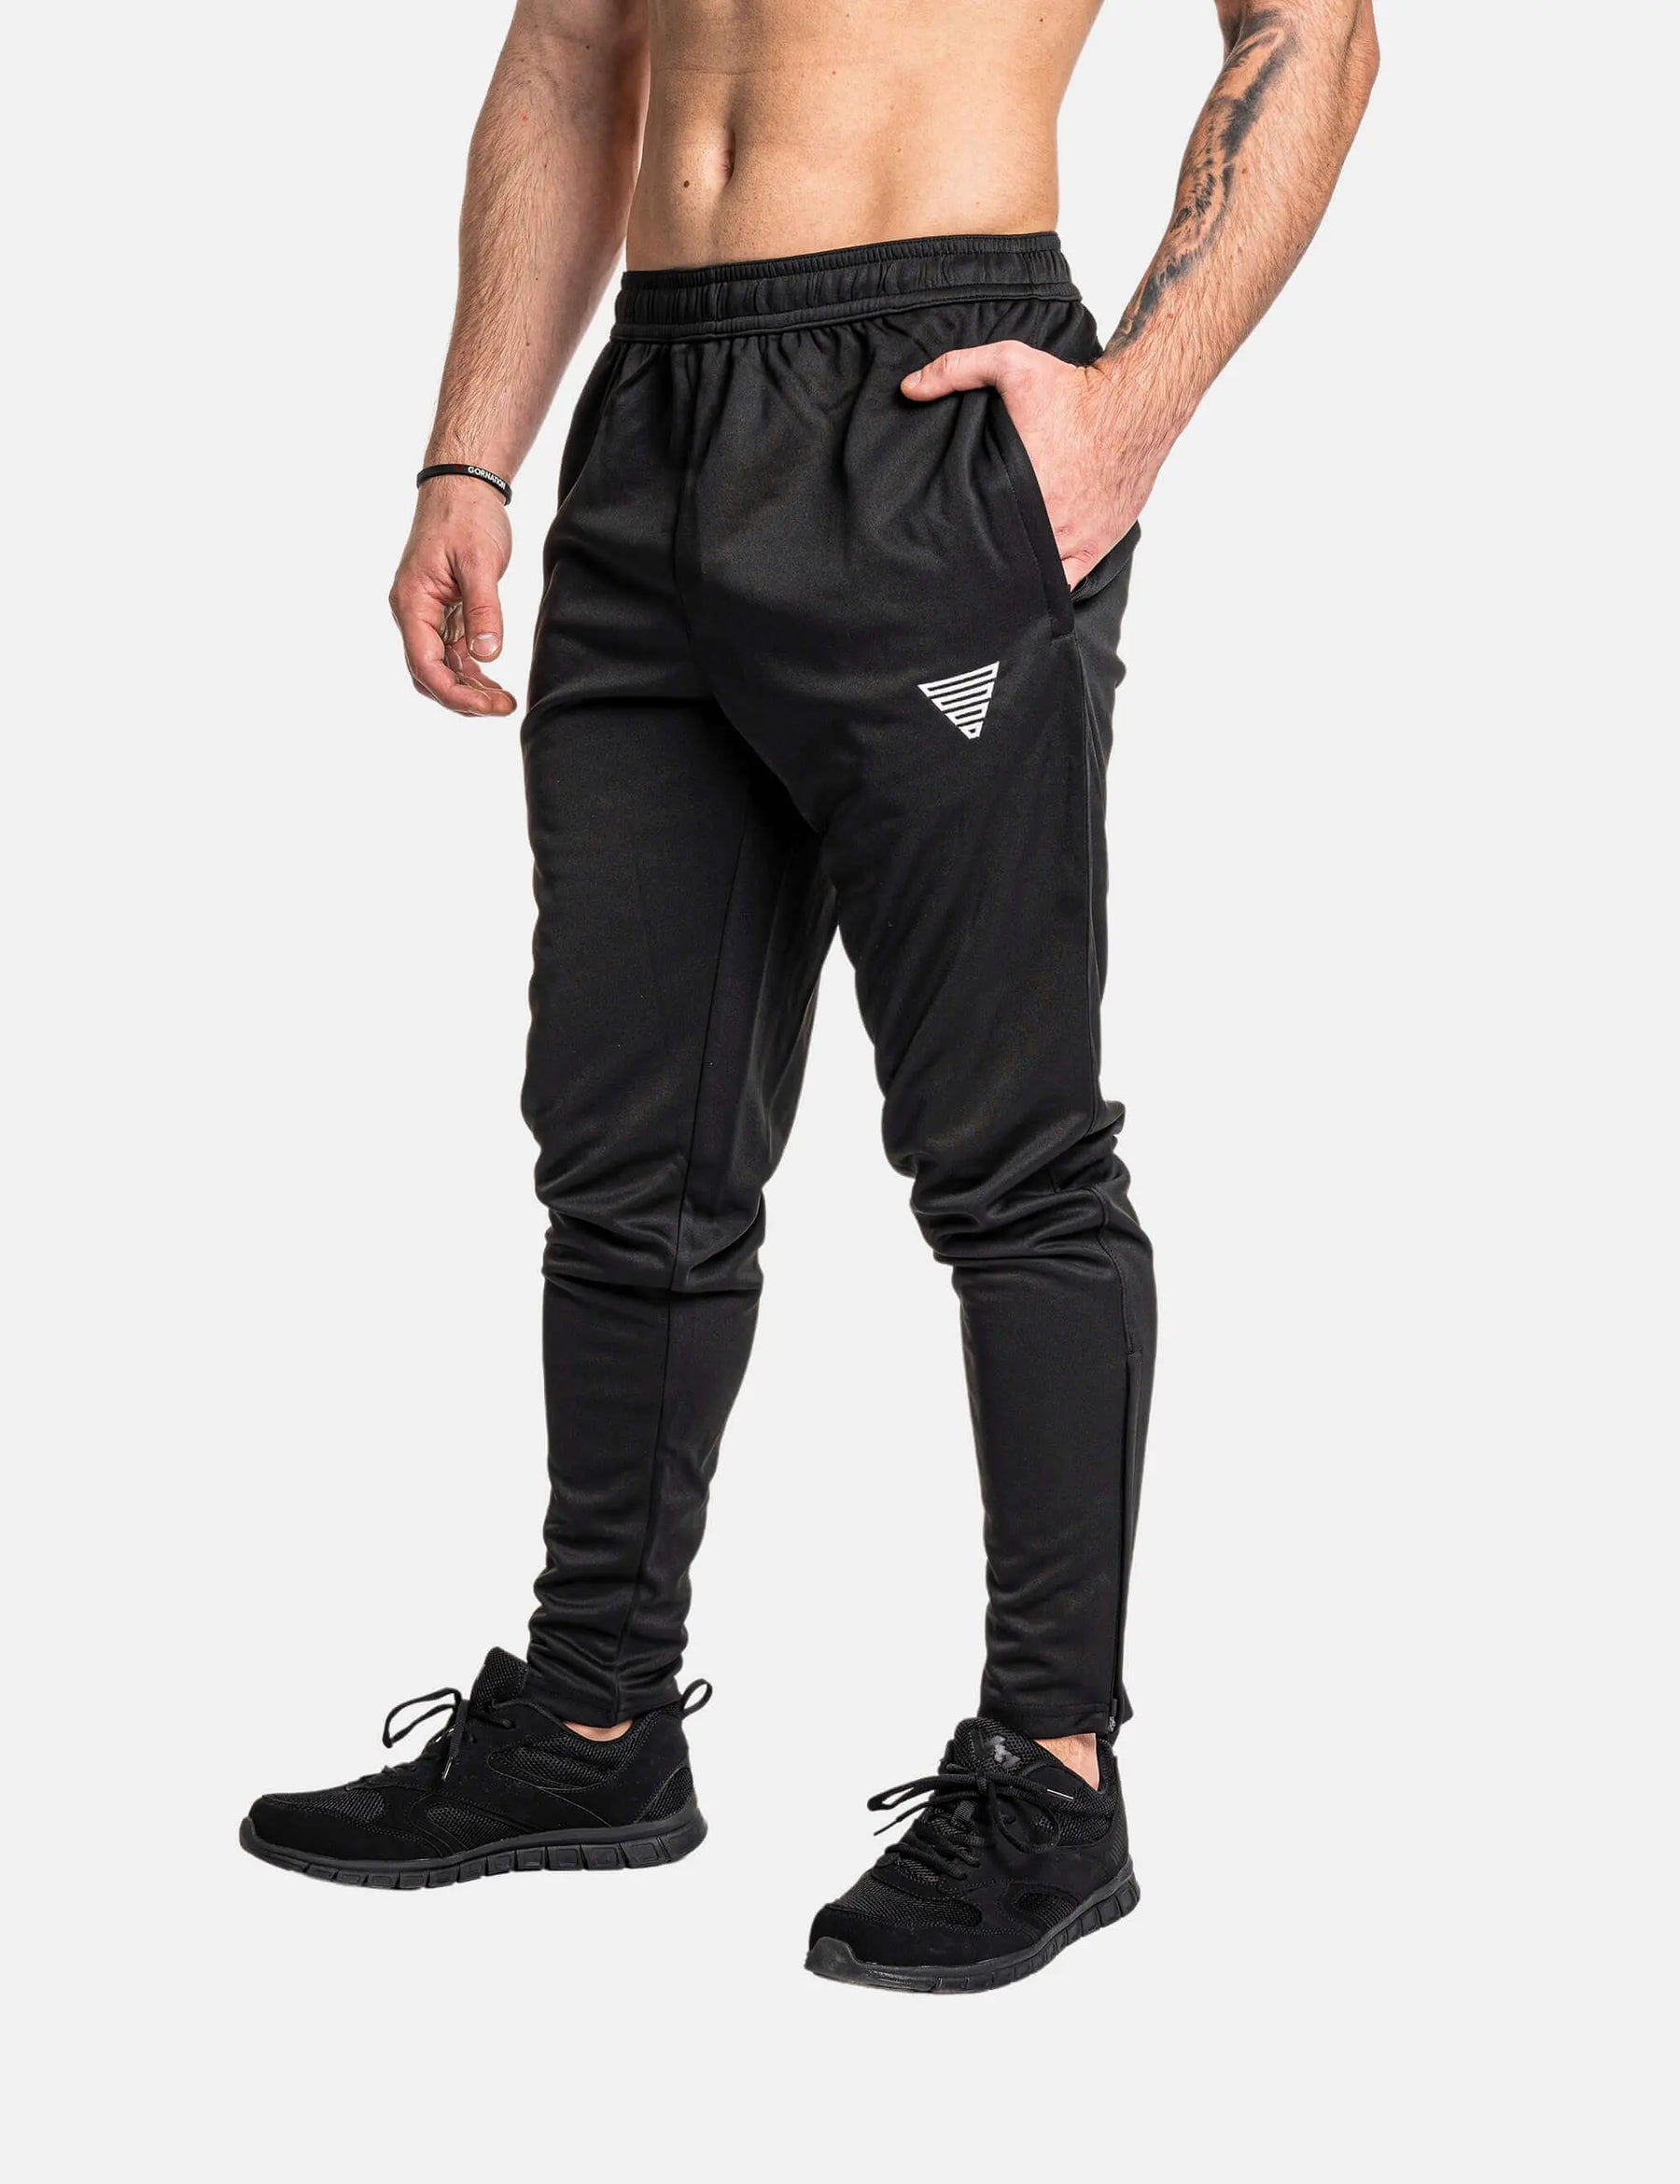 Musculo cargo gym pants // Black – MUSCULO